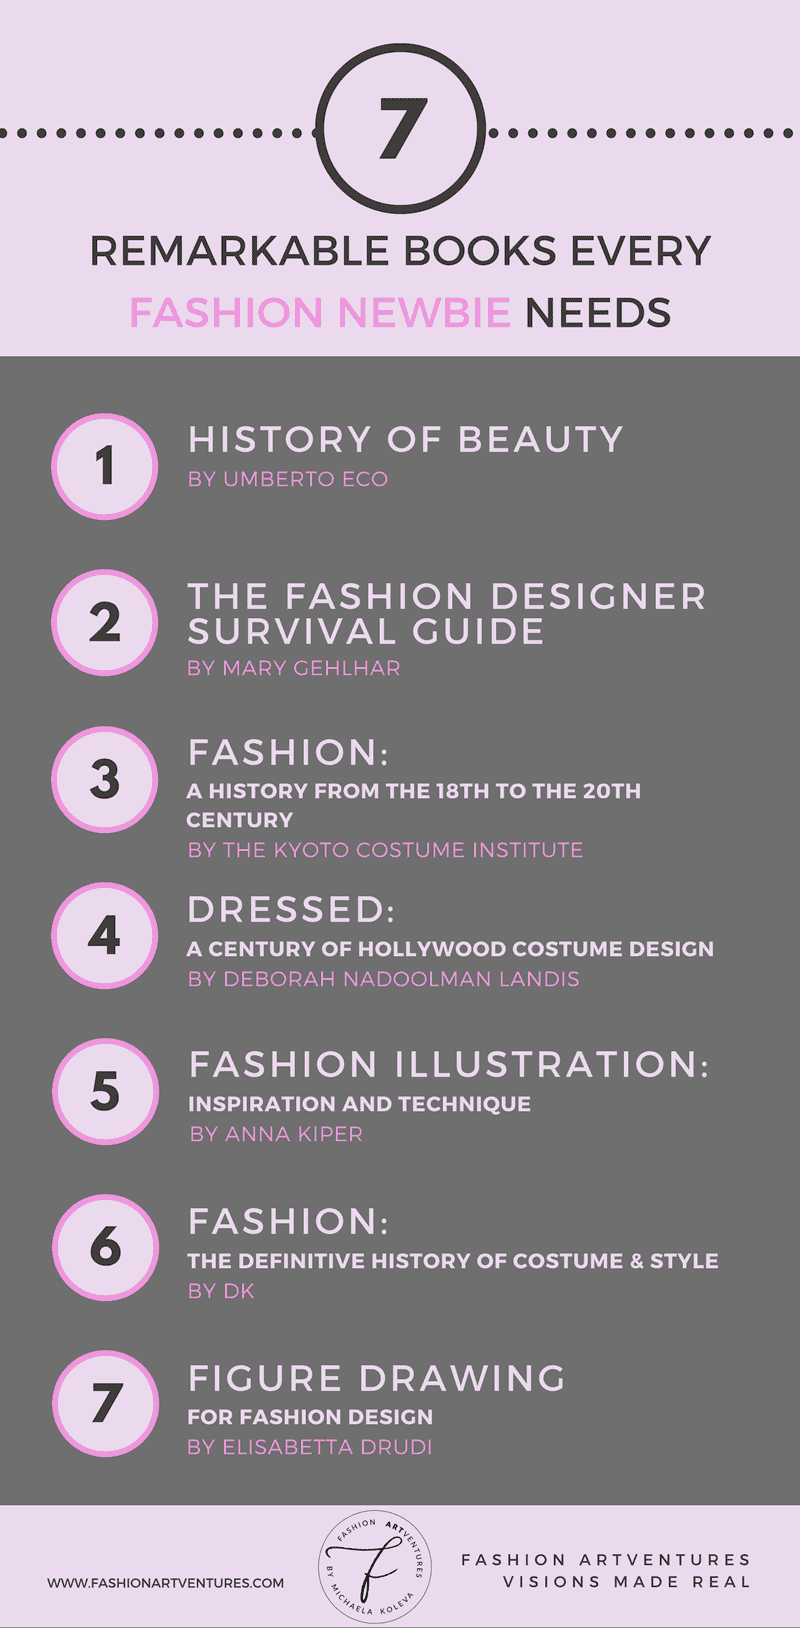 The Most Remarkable Books Every Fashion Newbie Needs- Infographic